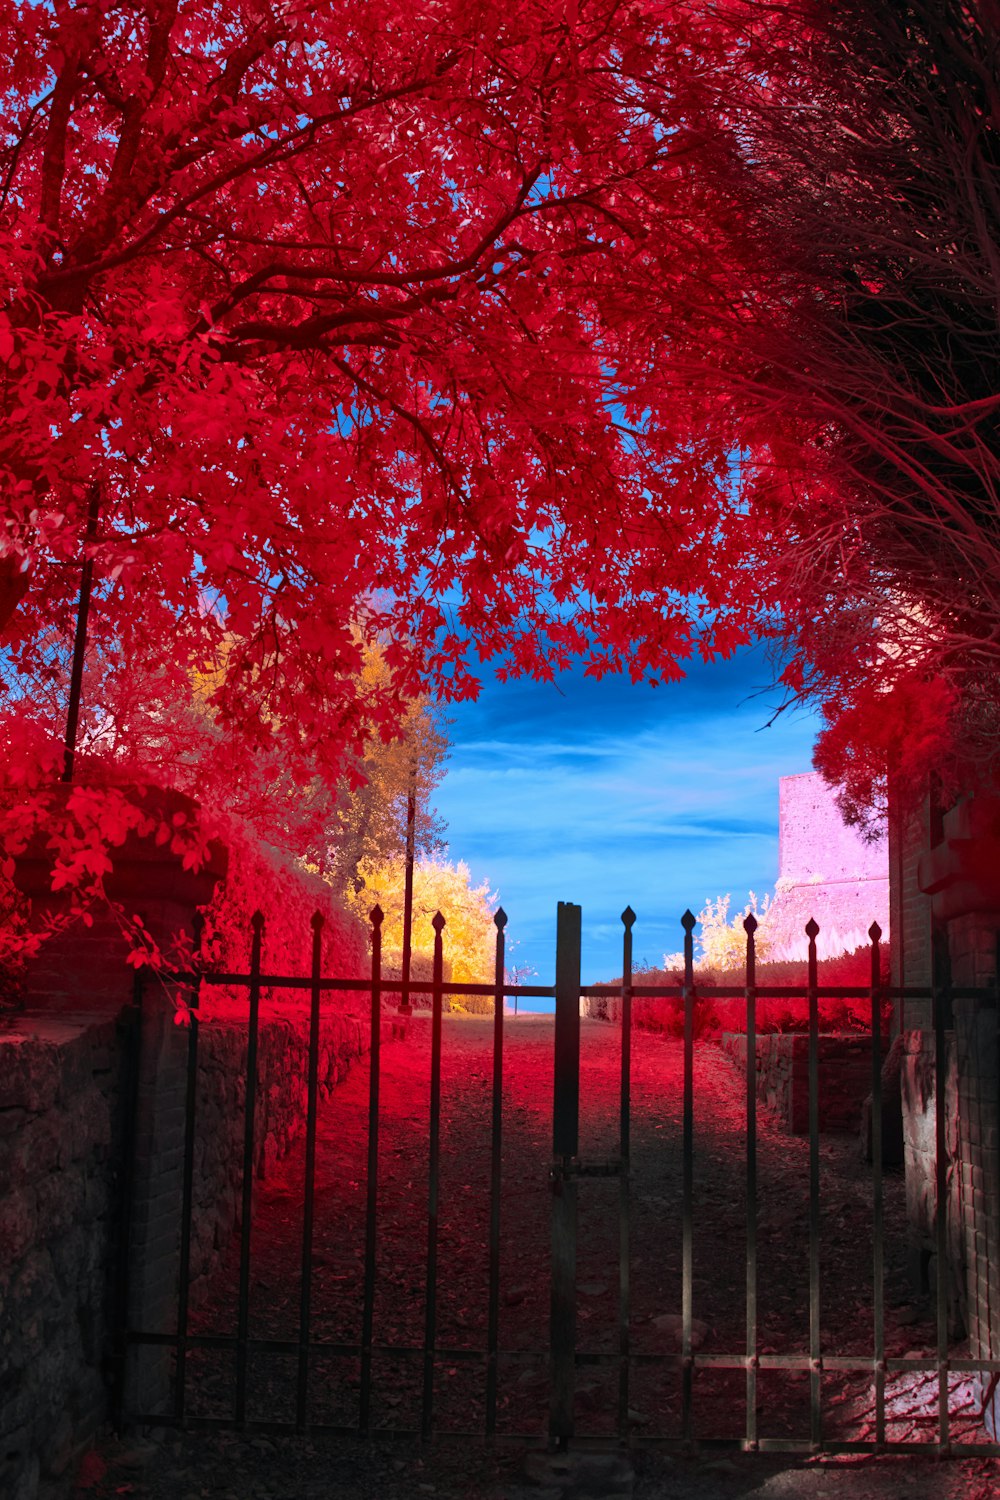 a gated in area with a red tree in the background